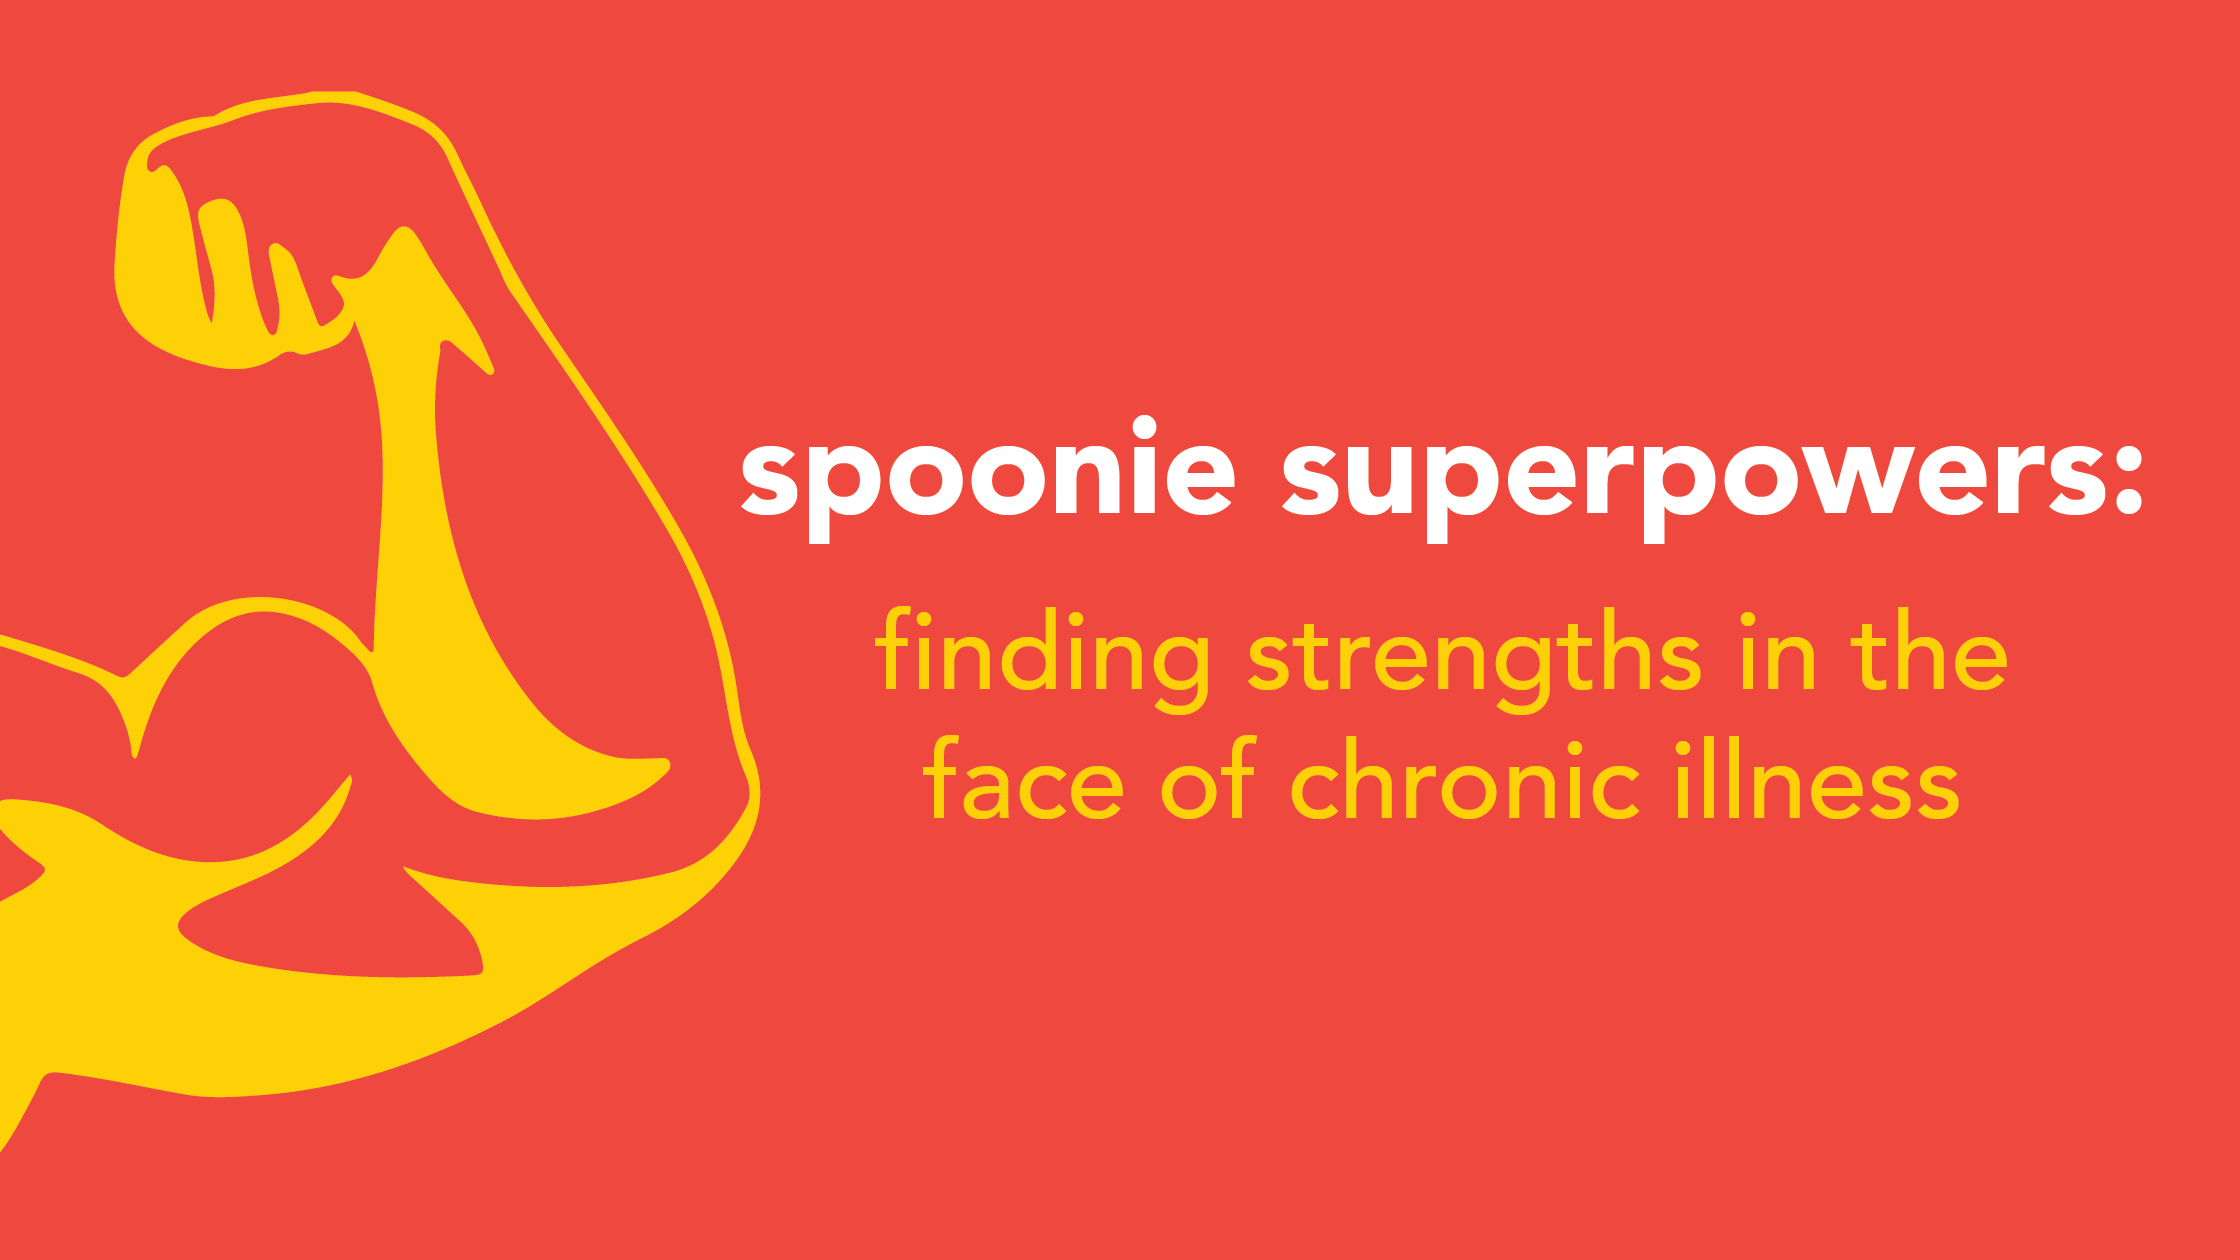 Spoonie Superpowers: Finding Strengths in the Face of Chronic Illness